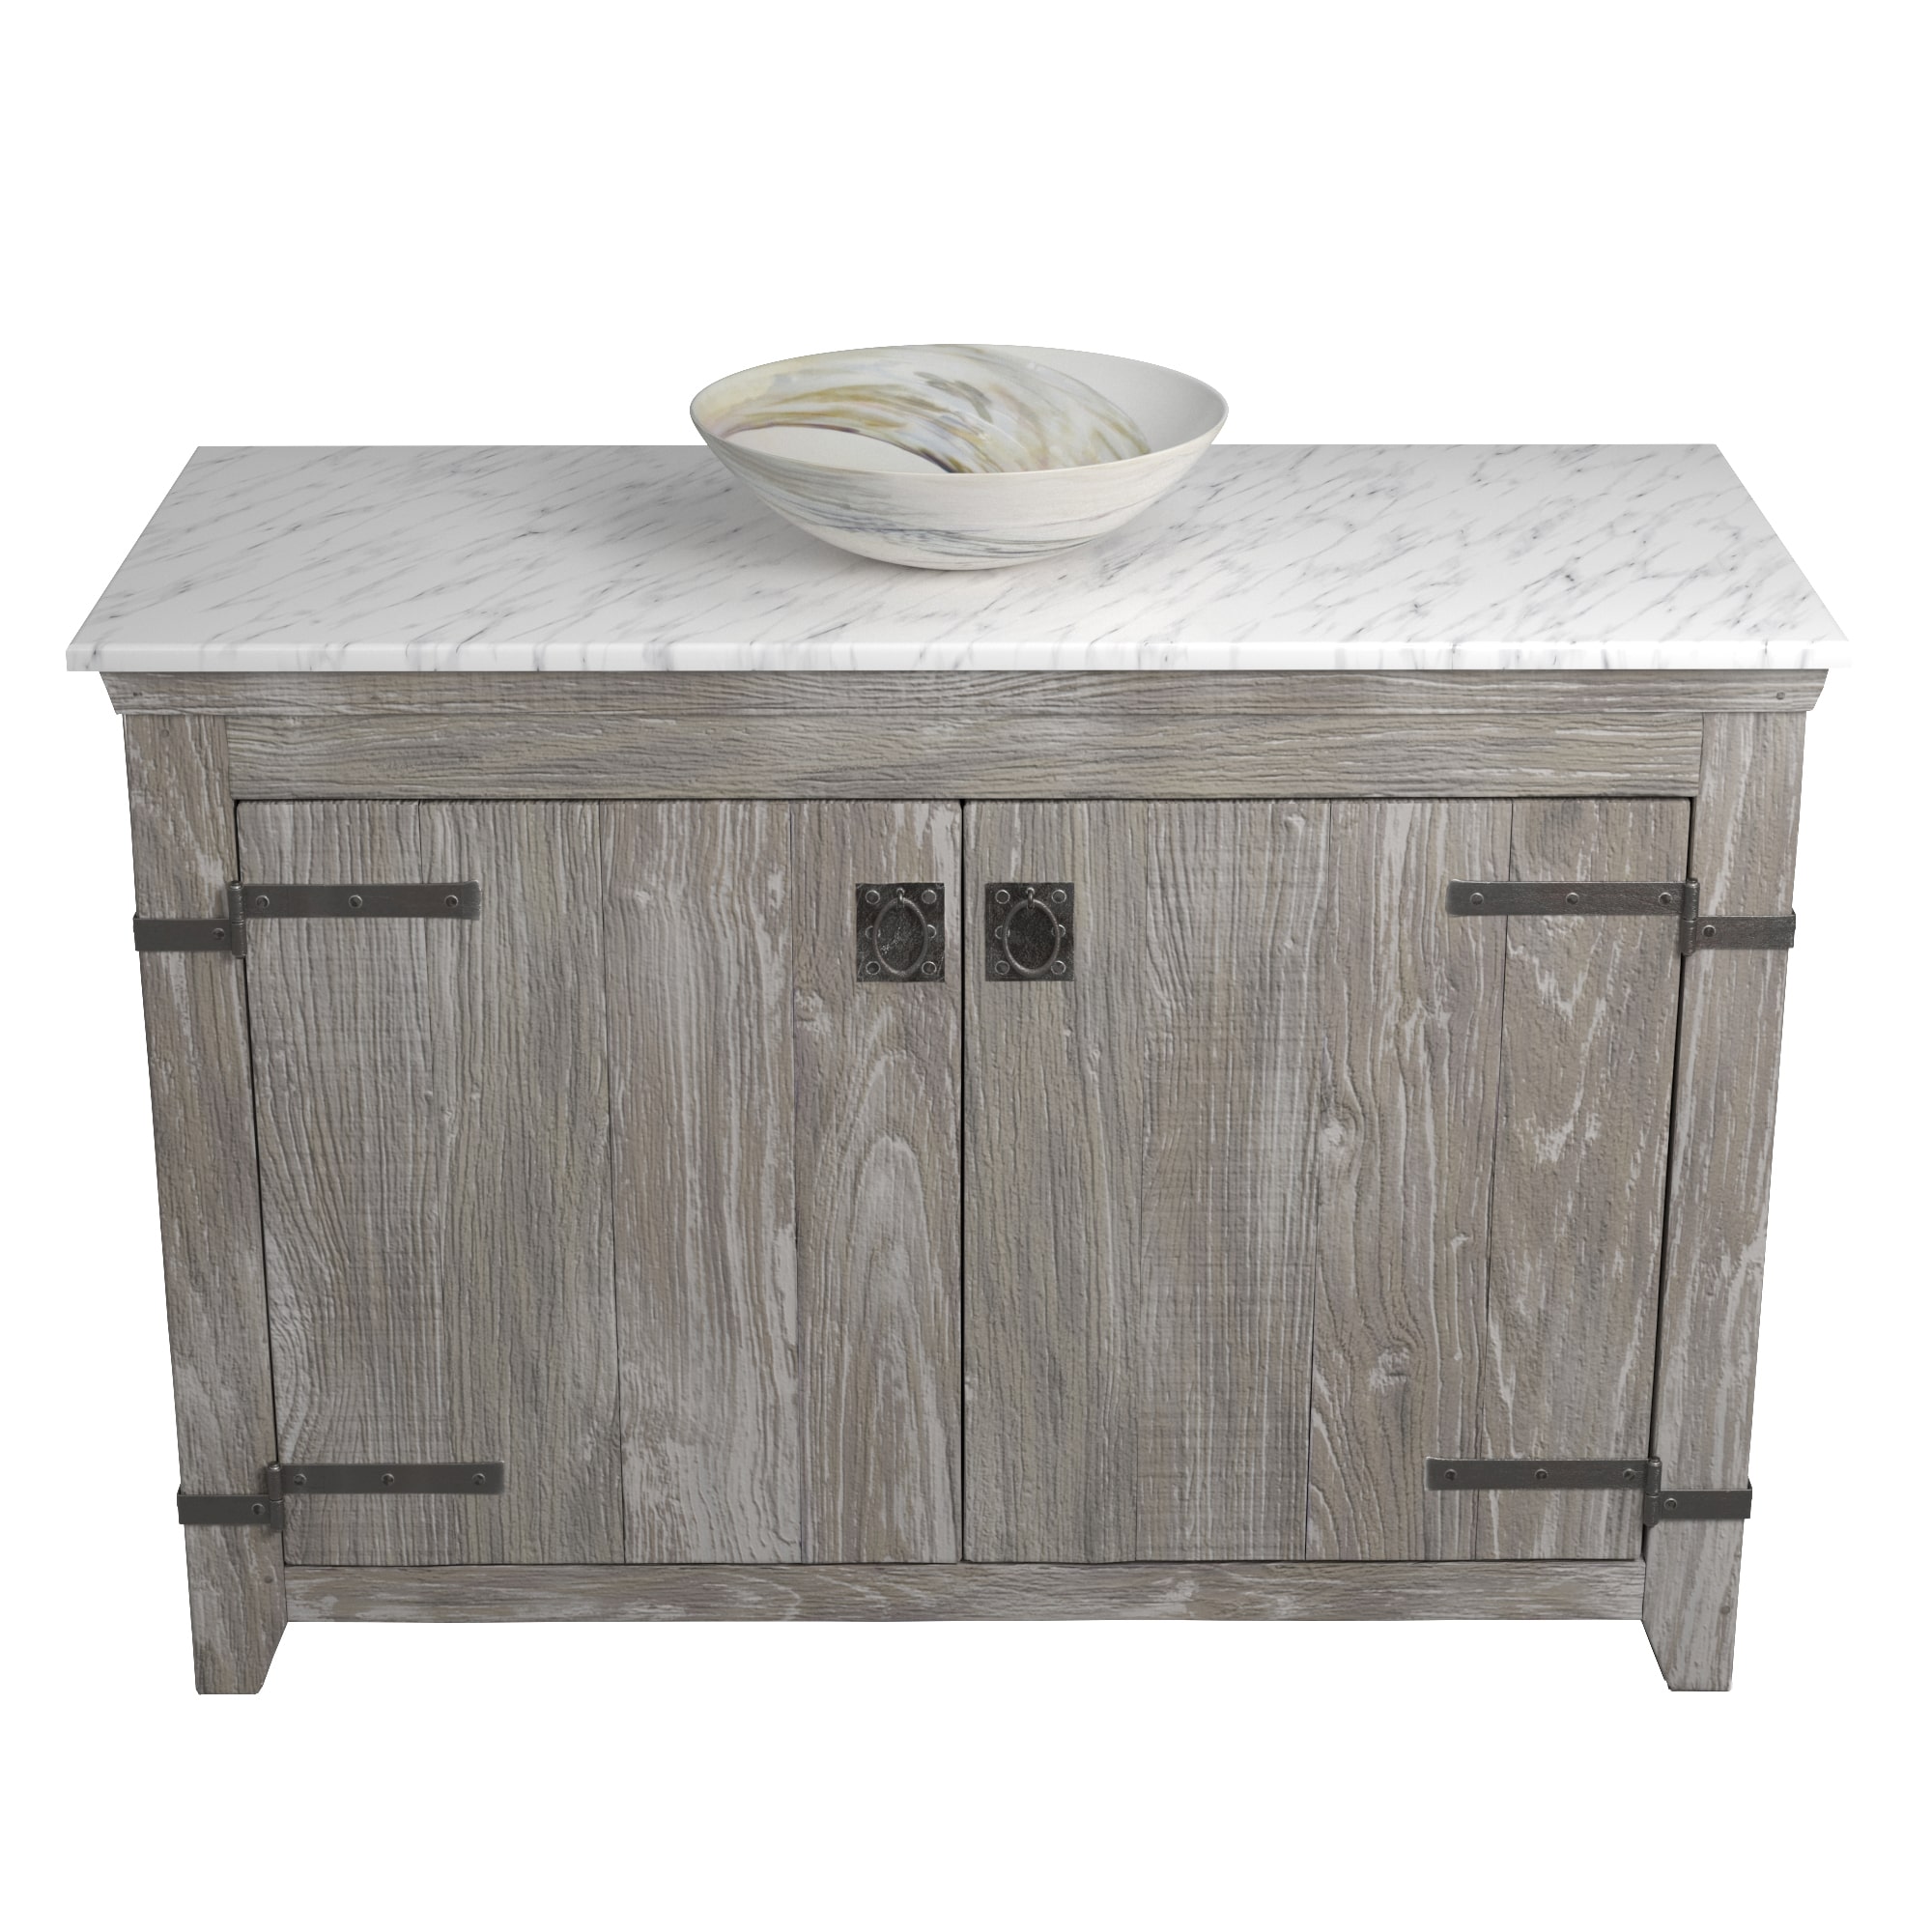 Native Trails 48" Americana Vanity in Driftwood with Carrara Marble Top and Verona in Abalone, Single Faucet Hole, BND48-VB-CT-MG-063